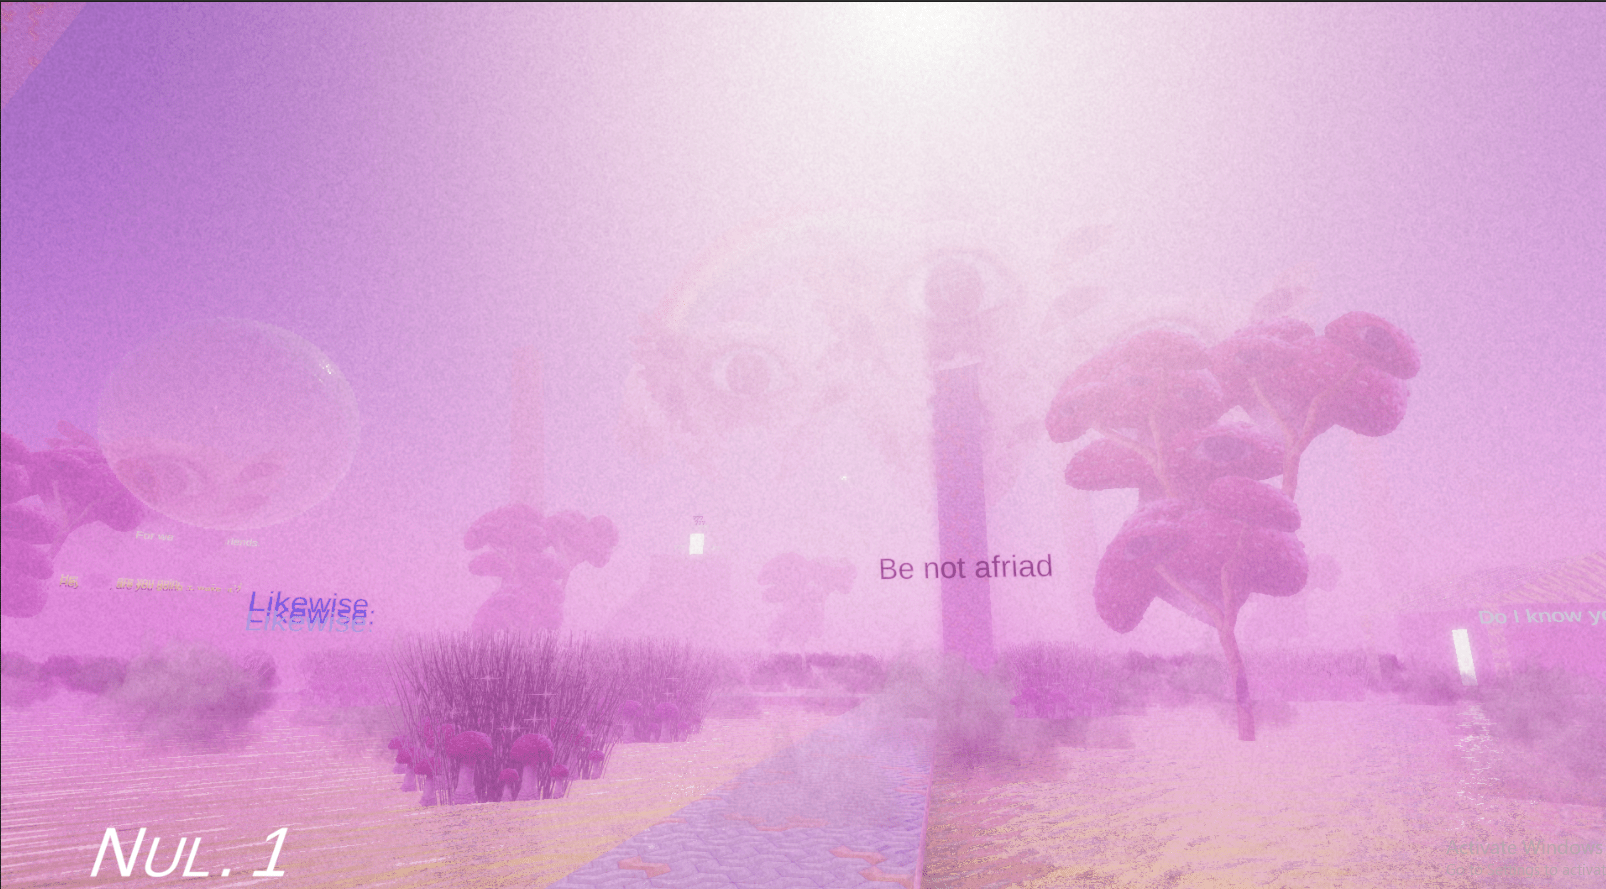 A purple and pink landscape with trees - Weirdcore